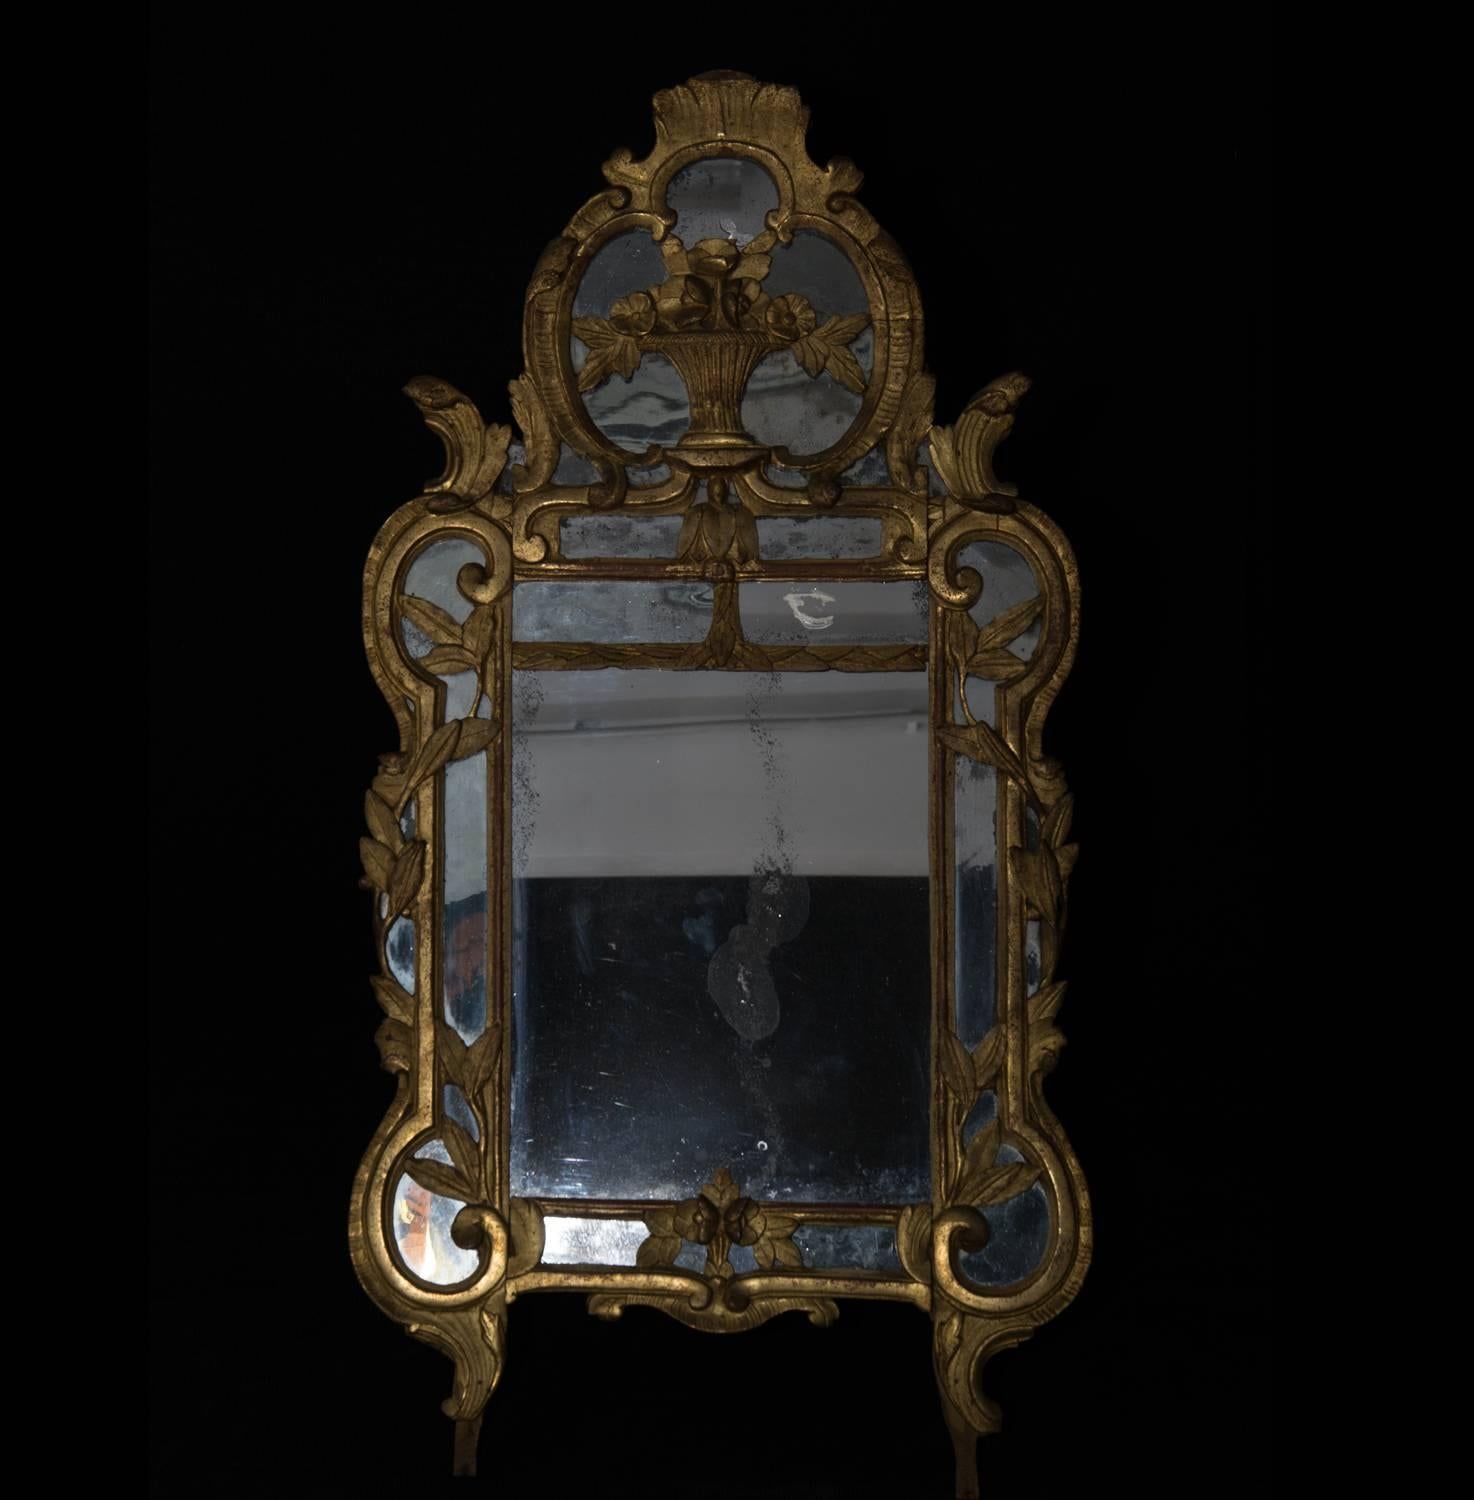 Unusual 18th century French mirror, with original gilding, glass and aged patina.

